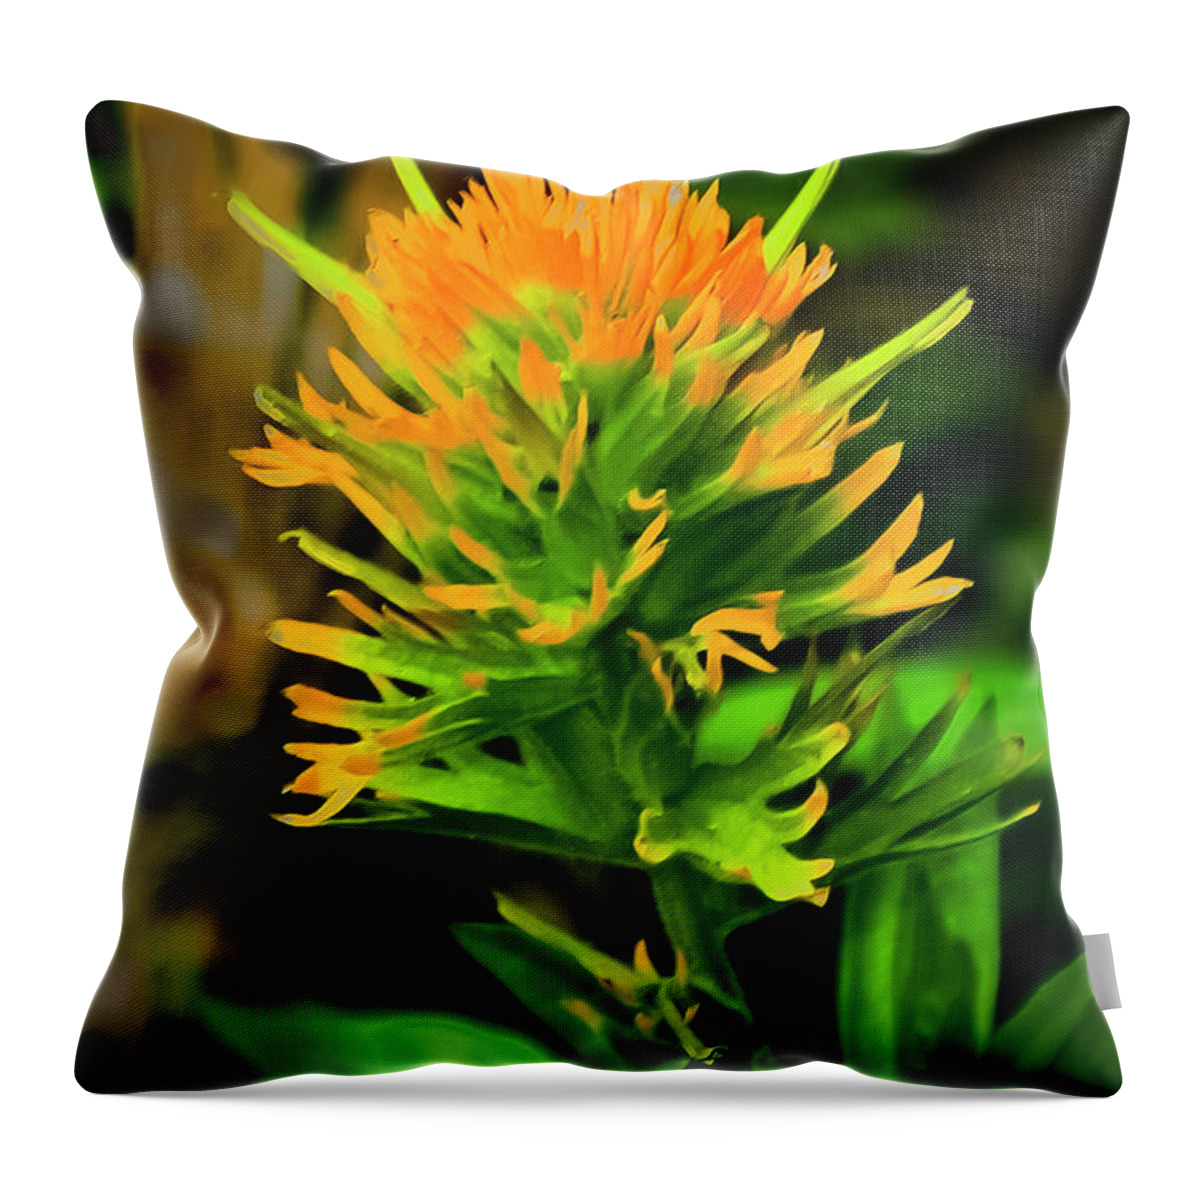 Paintbrush Throw Pillow featuring the photograph Paintbrush by Albert Seger